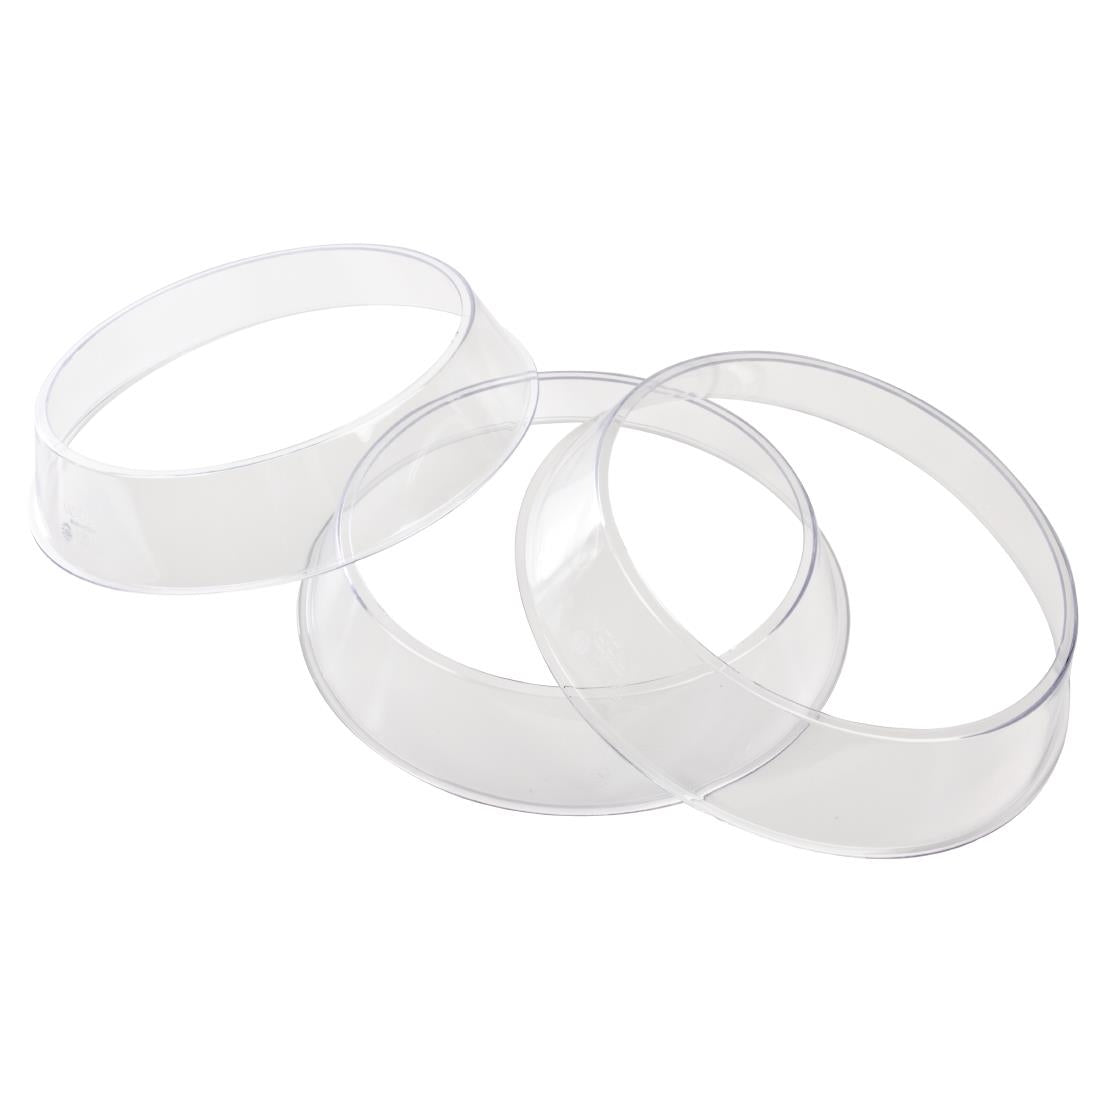 K481 Vogue Polycarbonate Plate Ring JD Catering Equipment Solutions Ltd